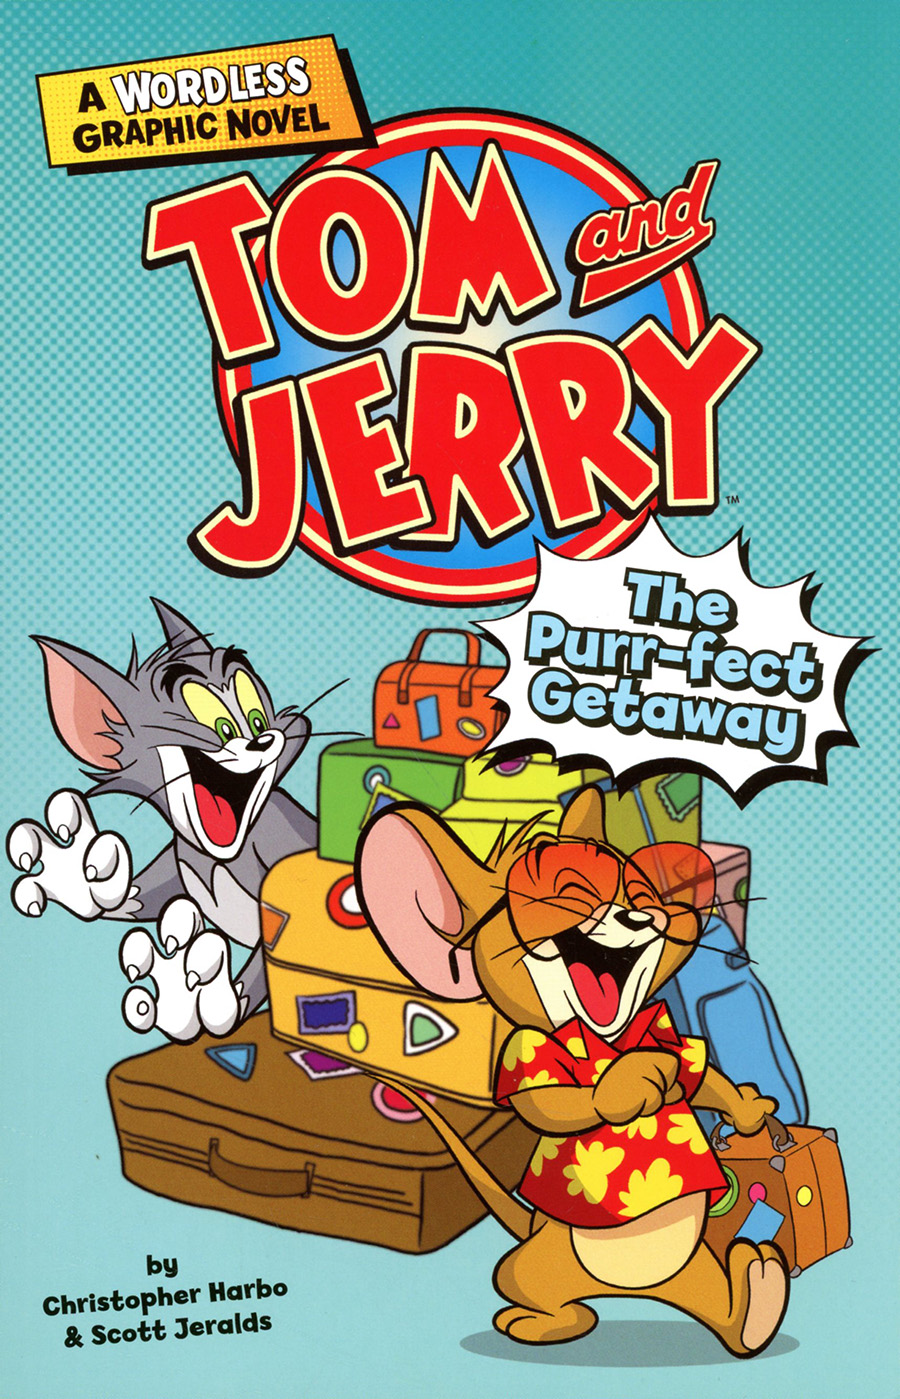 Tom And Jerry A Wordless Graphic Novel Purr-Fect Getaway TP